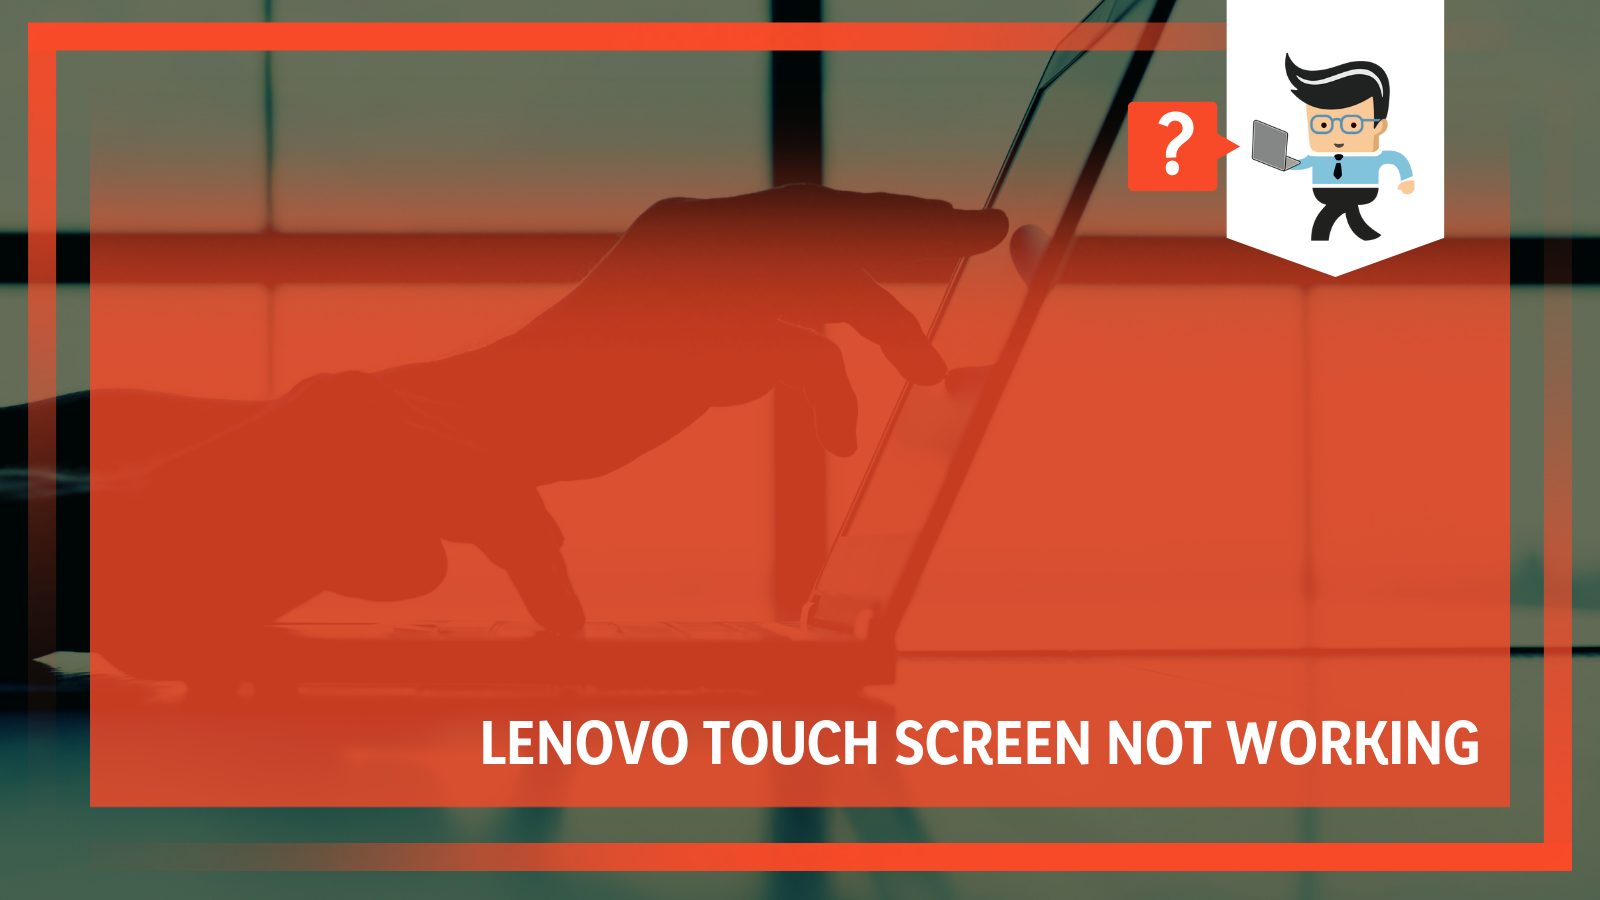 Lenovo touch screen not working